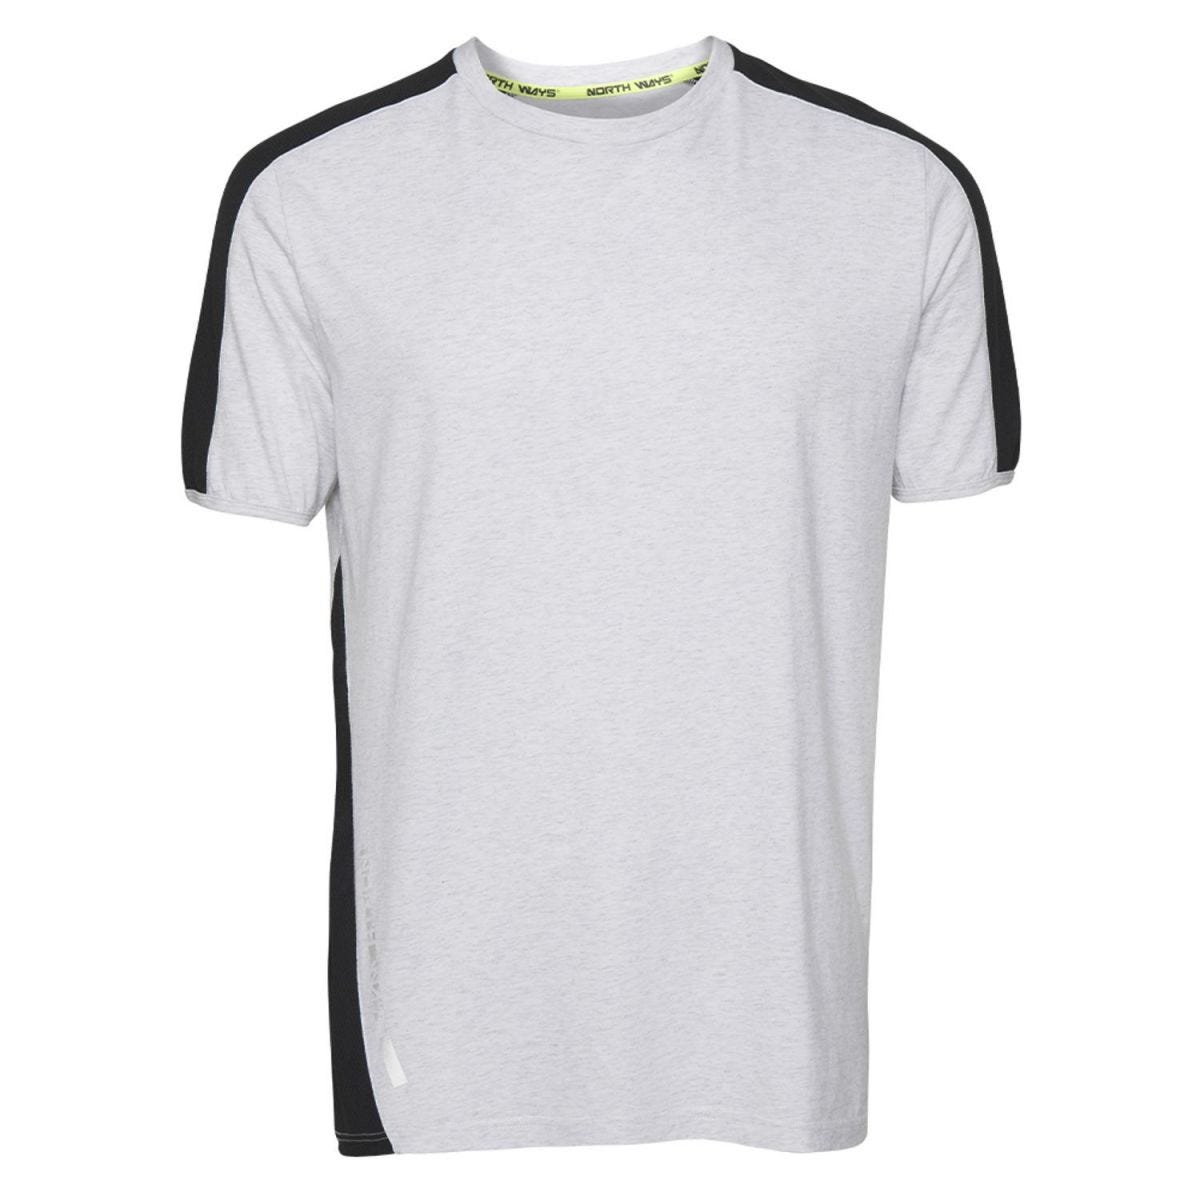 Tee-shirt à manches courtes pour homme Andy blanc chiné - North Ways - Taille 3XL 0